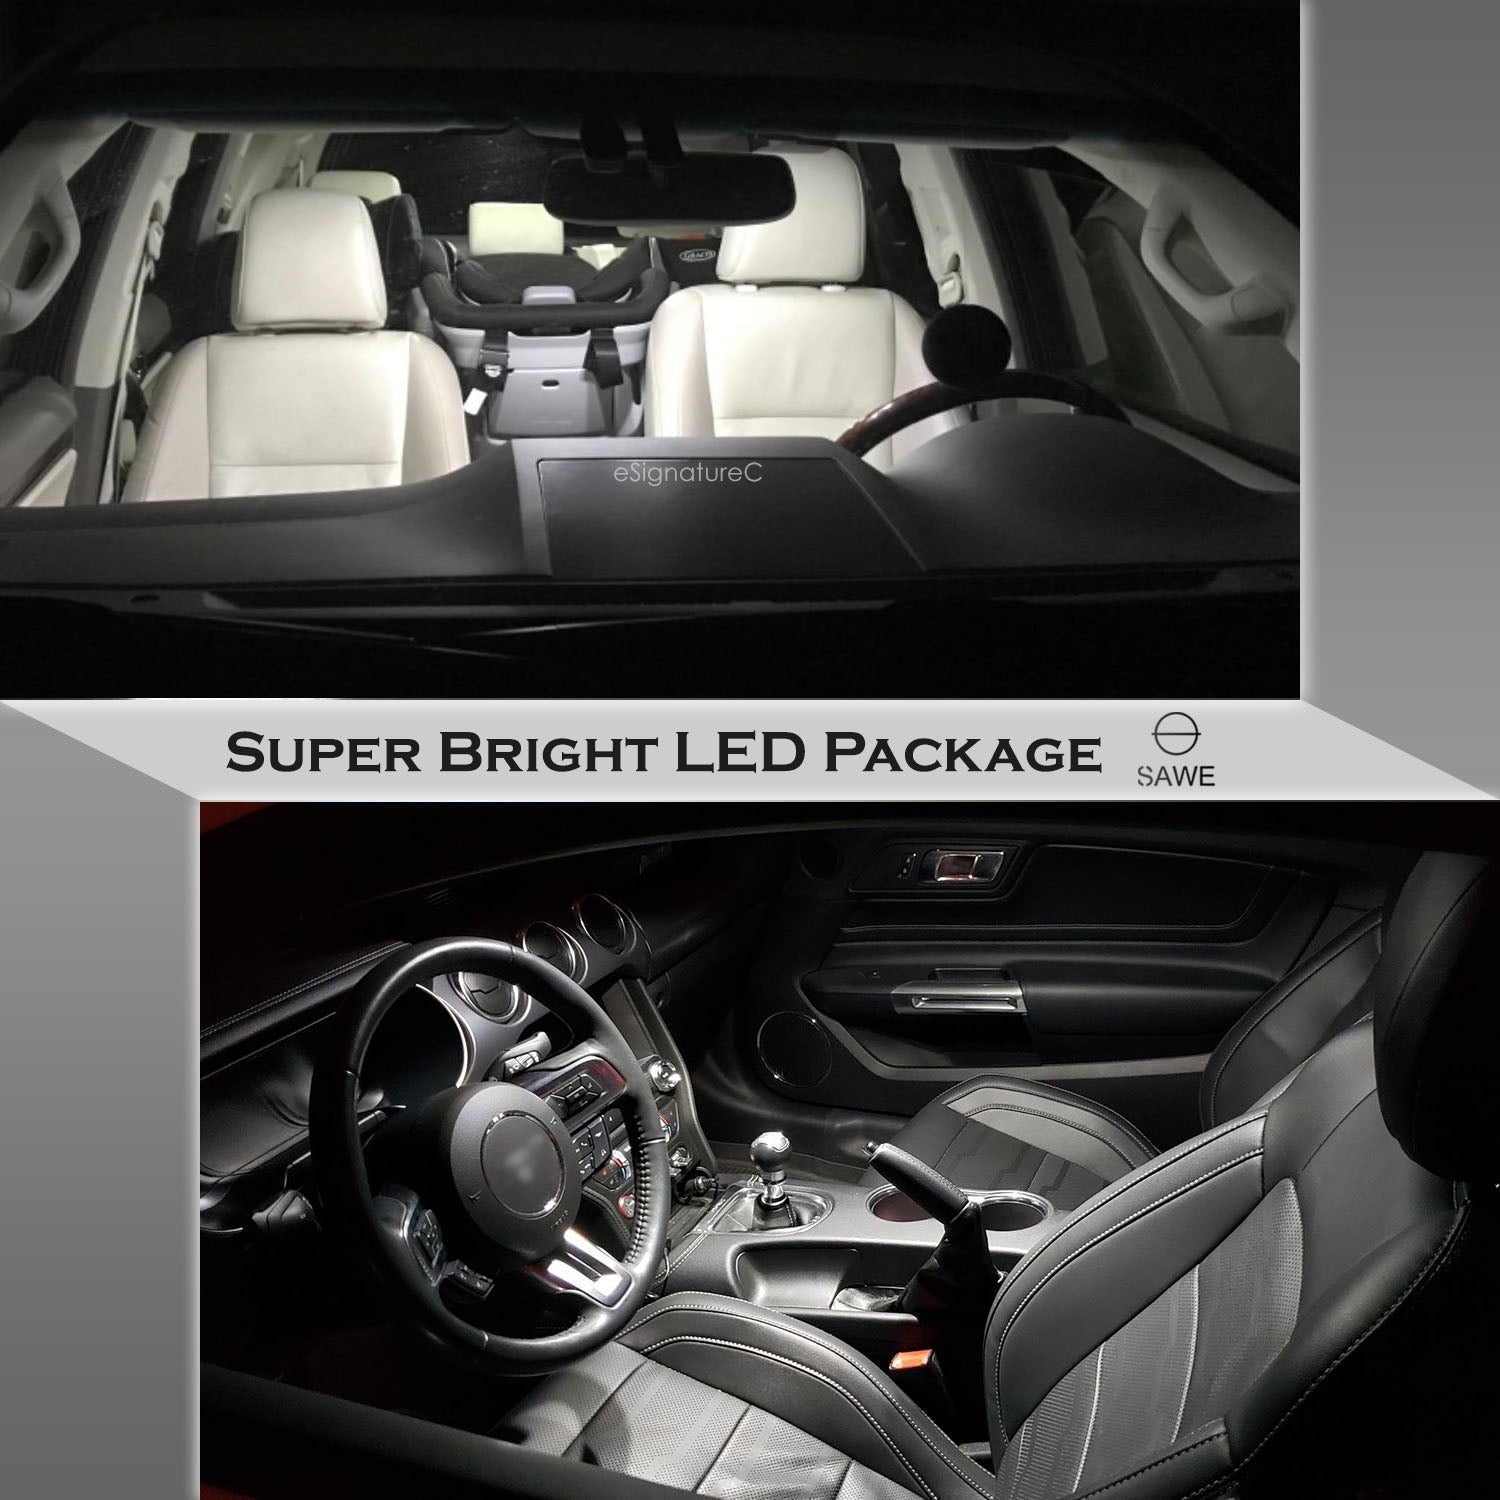 For Nissan Altima Interior LED Lights - Dome & Map Light Bulbs Package Kit for 2002 - 2006 - White